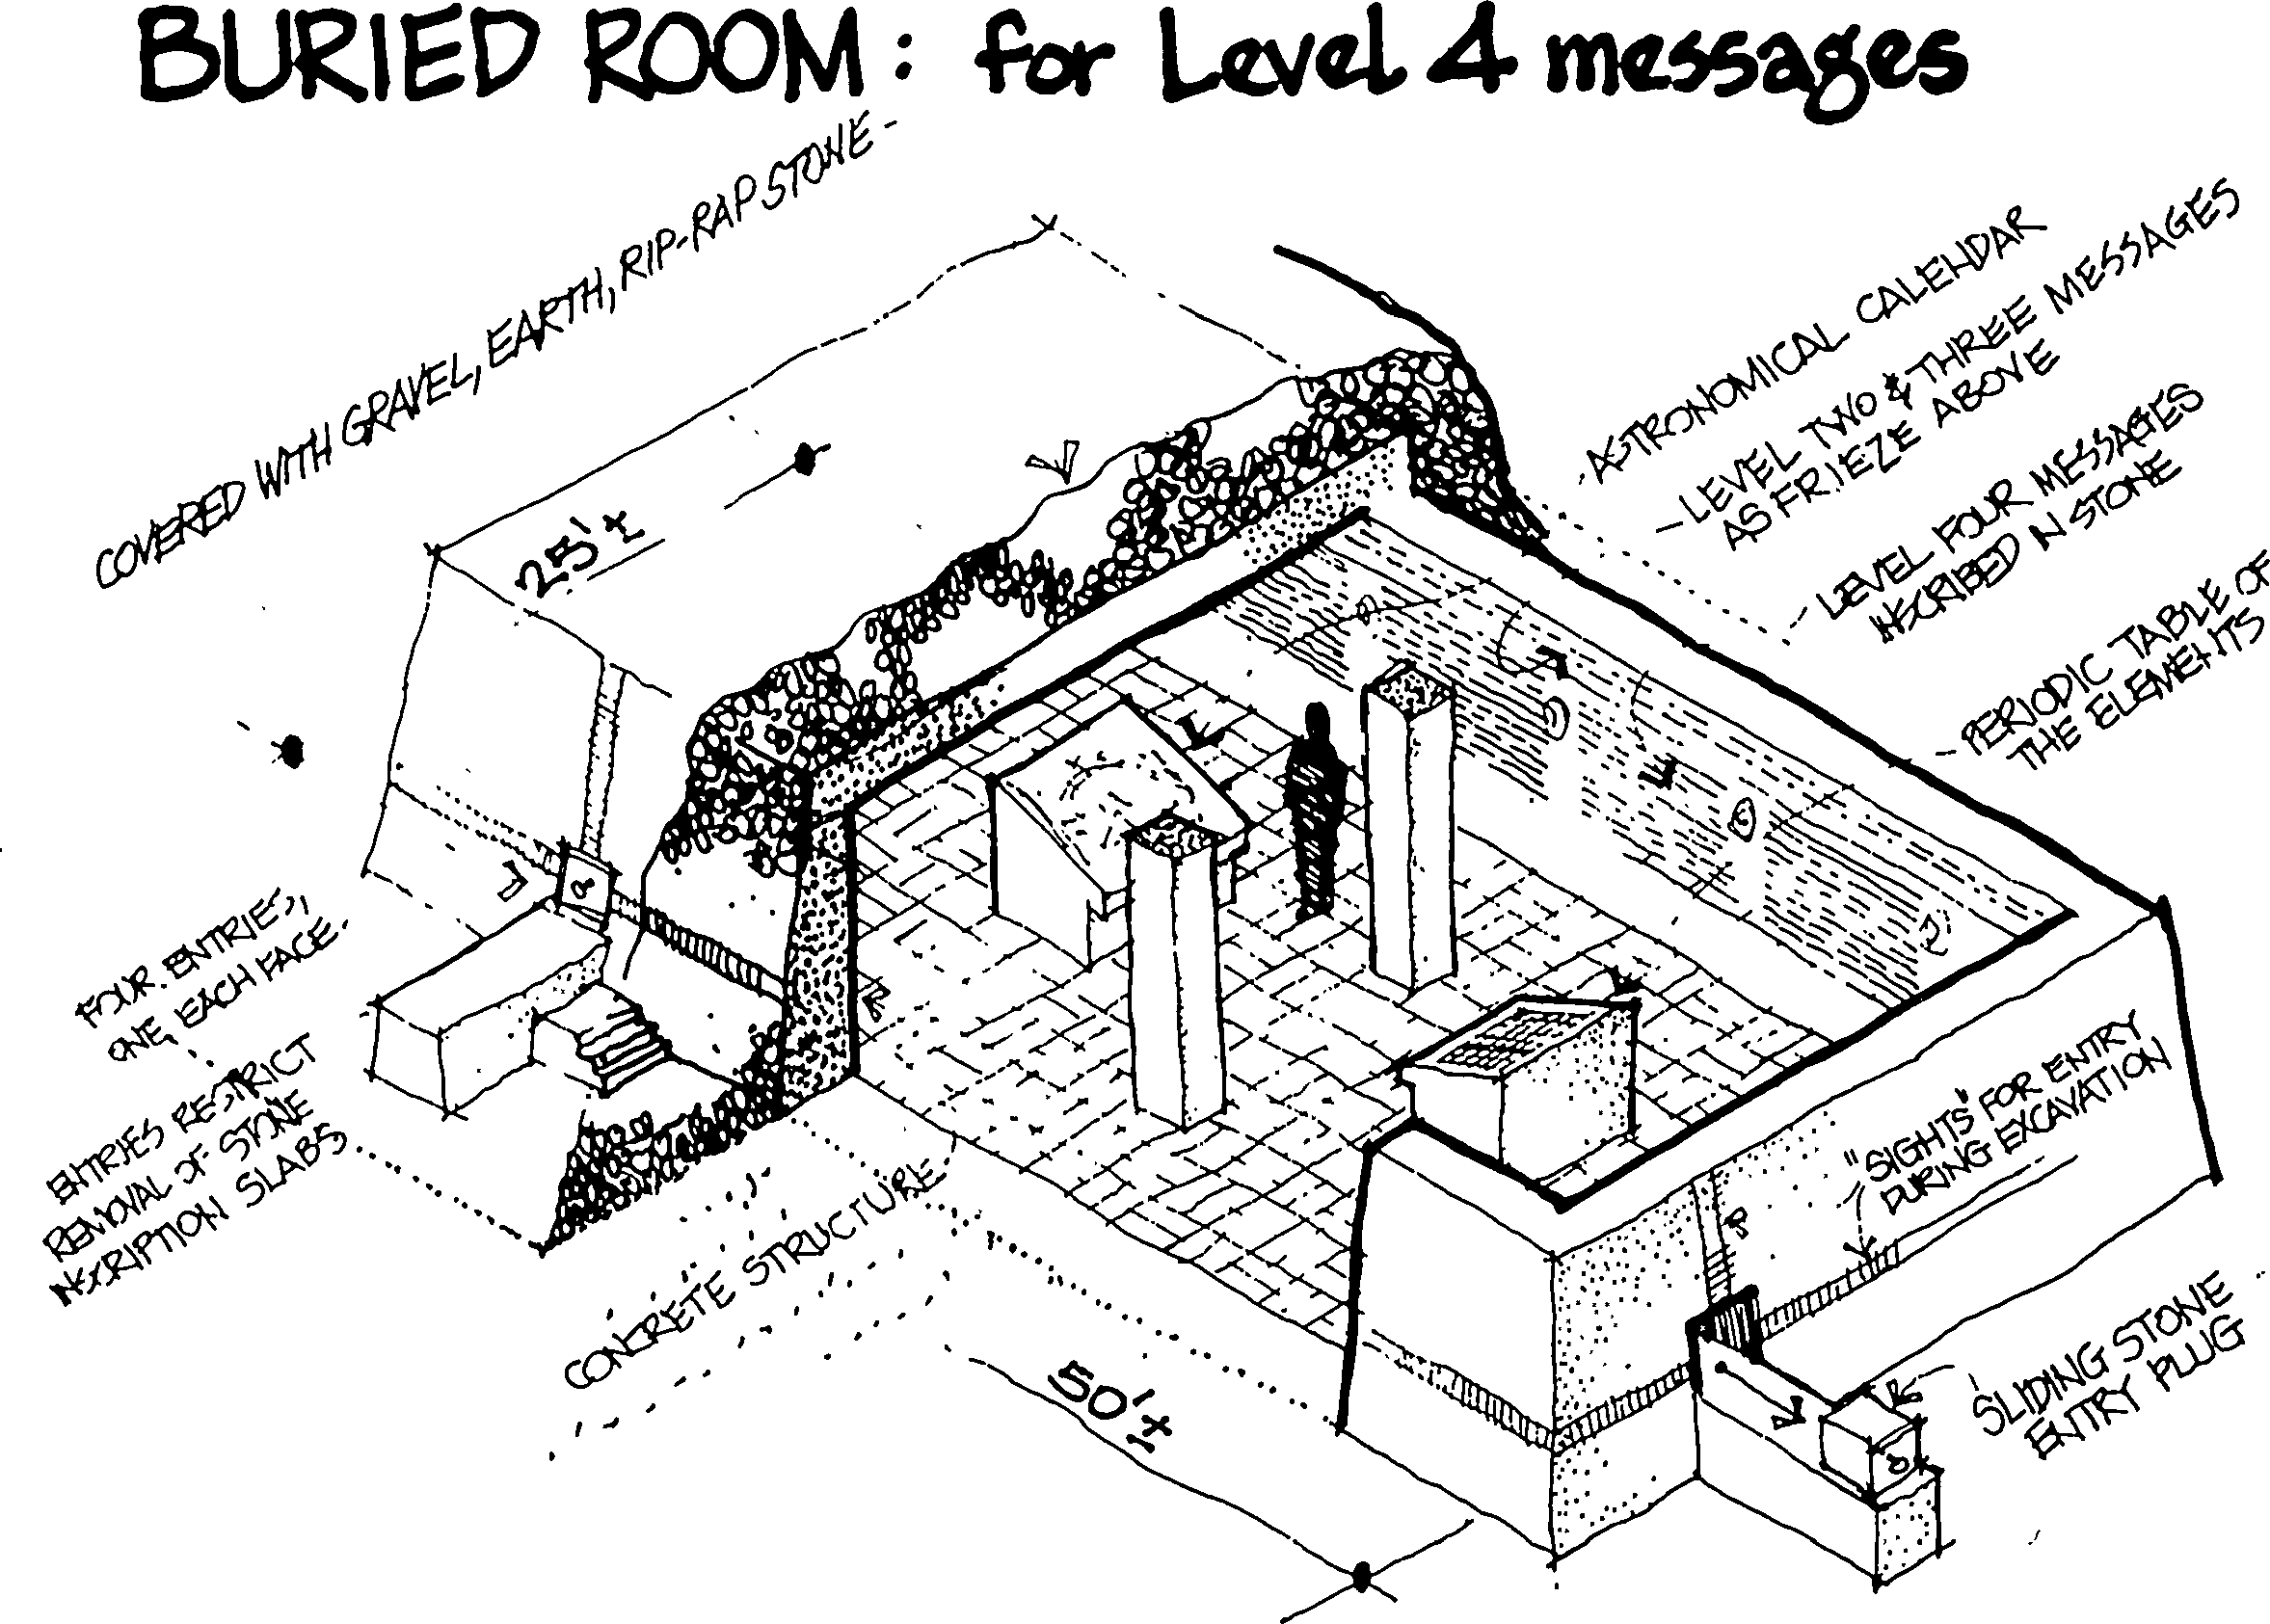 Sketch showing the buried room for Level 4 messages, measuring 25 by 50 feet. The entrances are accessed by pulling a stone plug and crawling through a small opening. The inner walls bear inscriptions in multiple languages. Informational displays show the astronomical chart and periodic table.